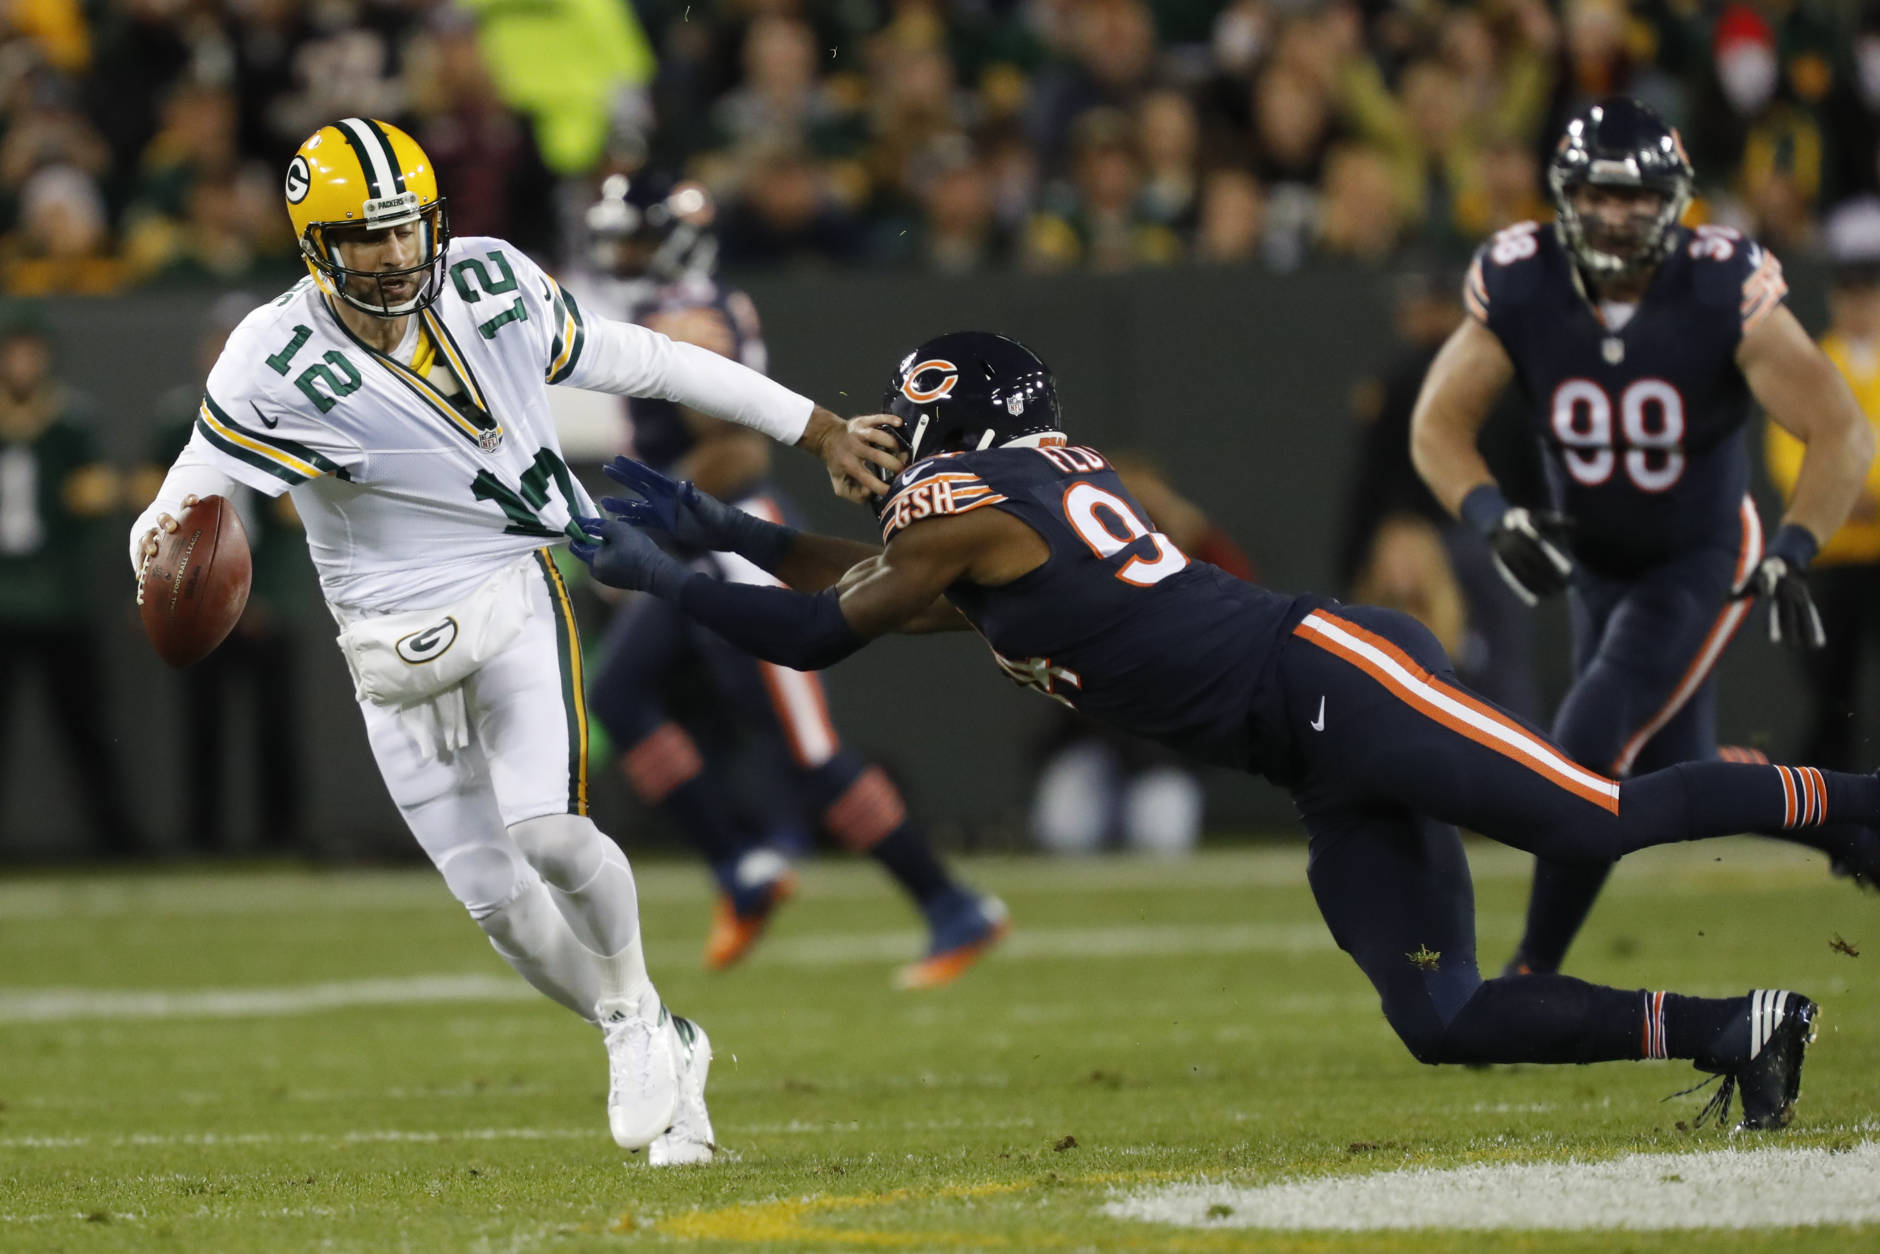 Green Bay Packers quarterback Aaron Rodgers (12) tries to runs away from Chicago Bears outside linebacker Leonard Floyd (94) during the first half of an NFL football game, Thursday, Oct. 20, 2016, in Green Bay, Wis. (AP Photo/Matt Ludtke)